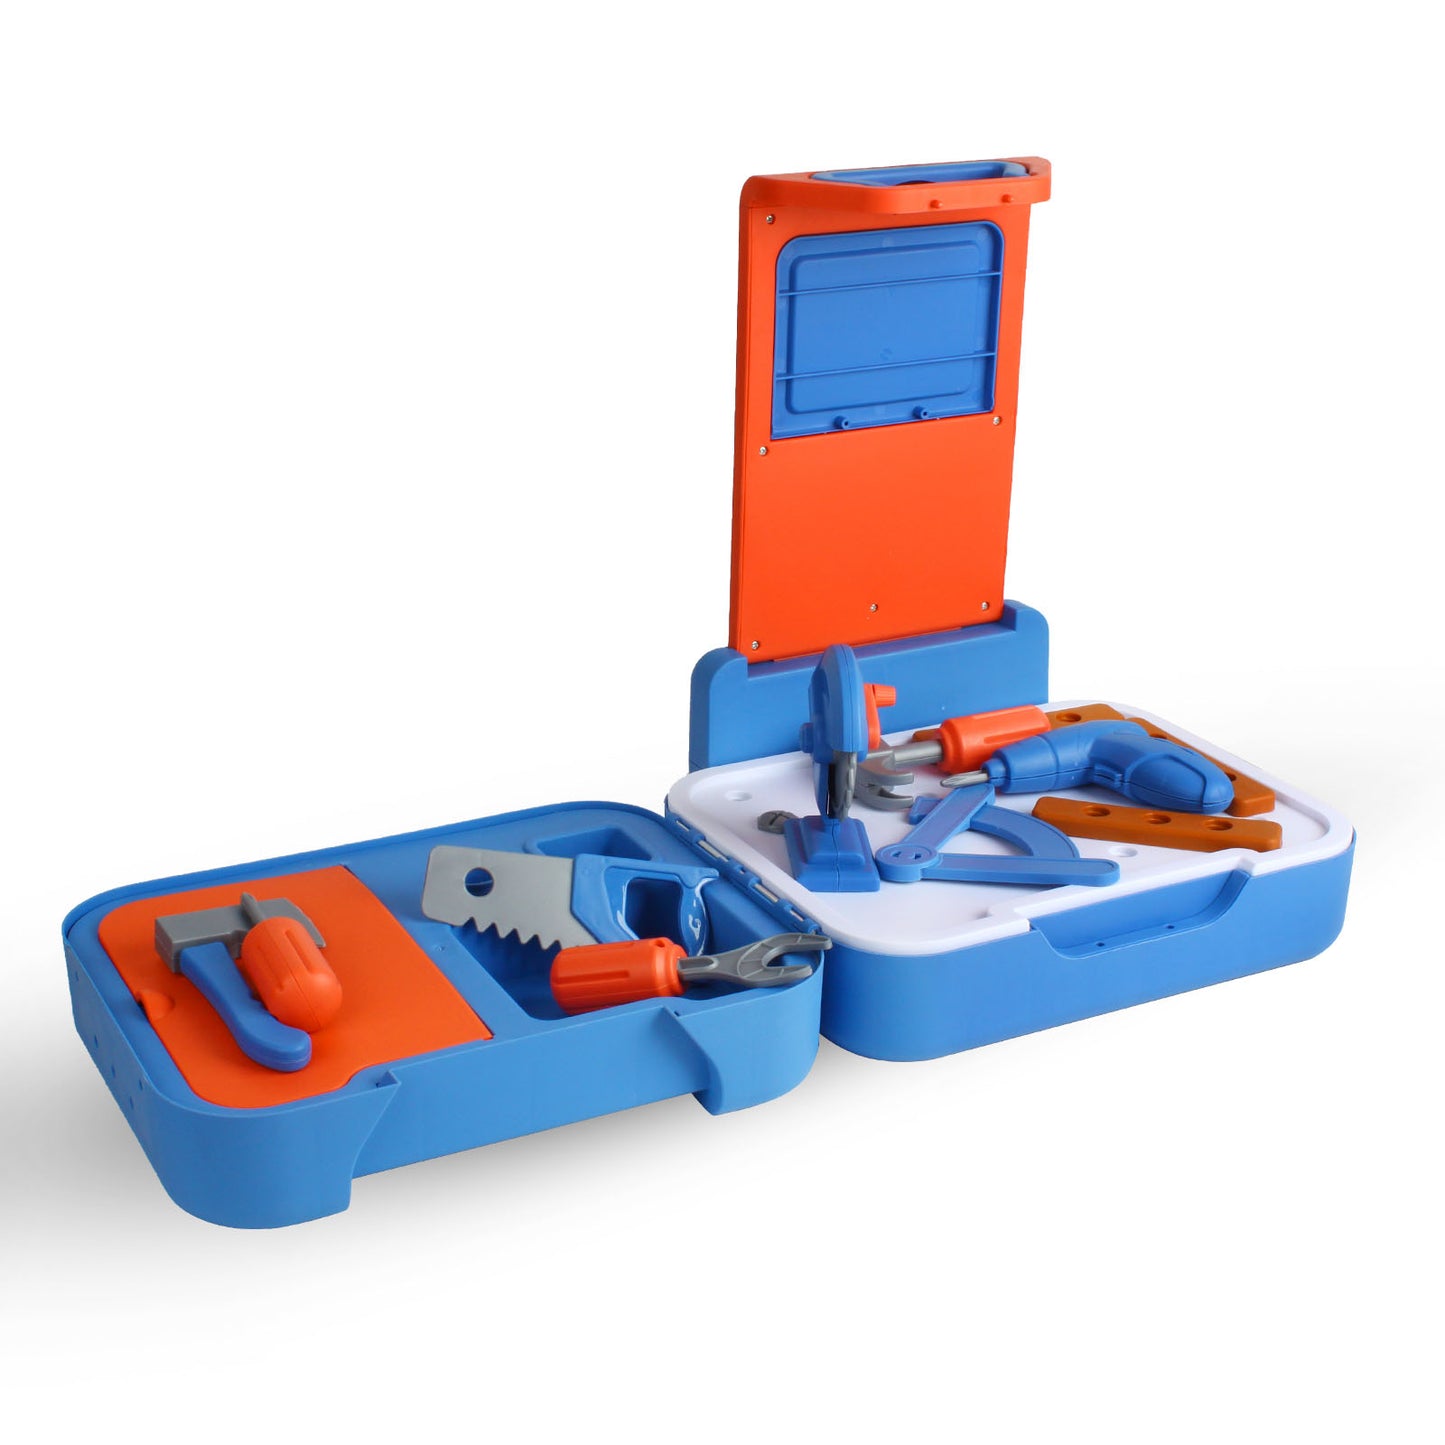 NOOLY Toddler Tool Set, Pretend Role Play FZWXGJ-01 25737